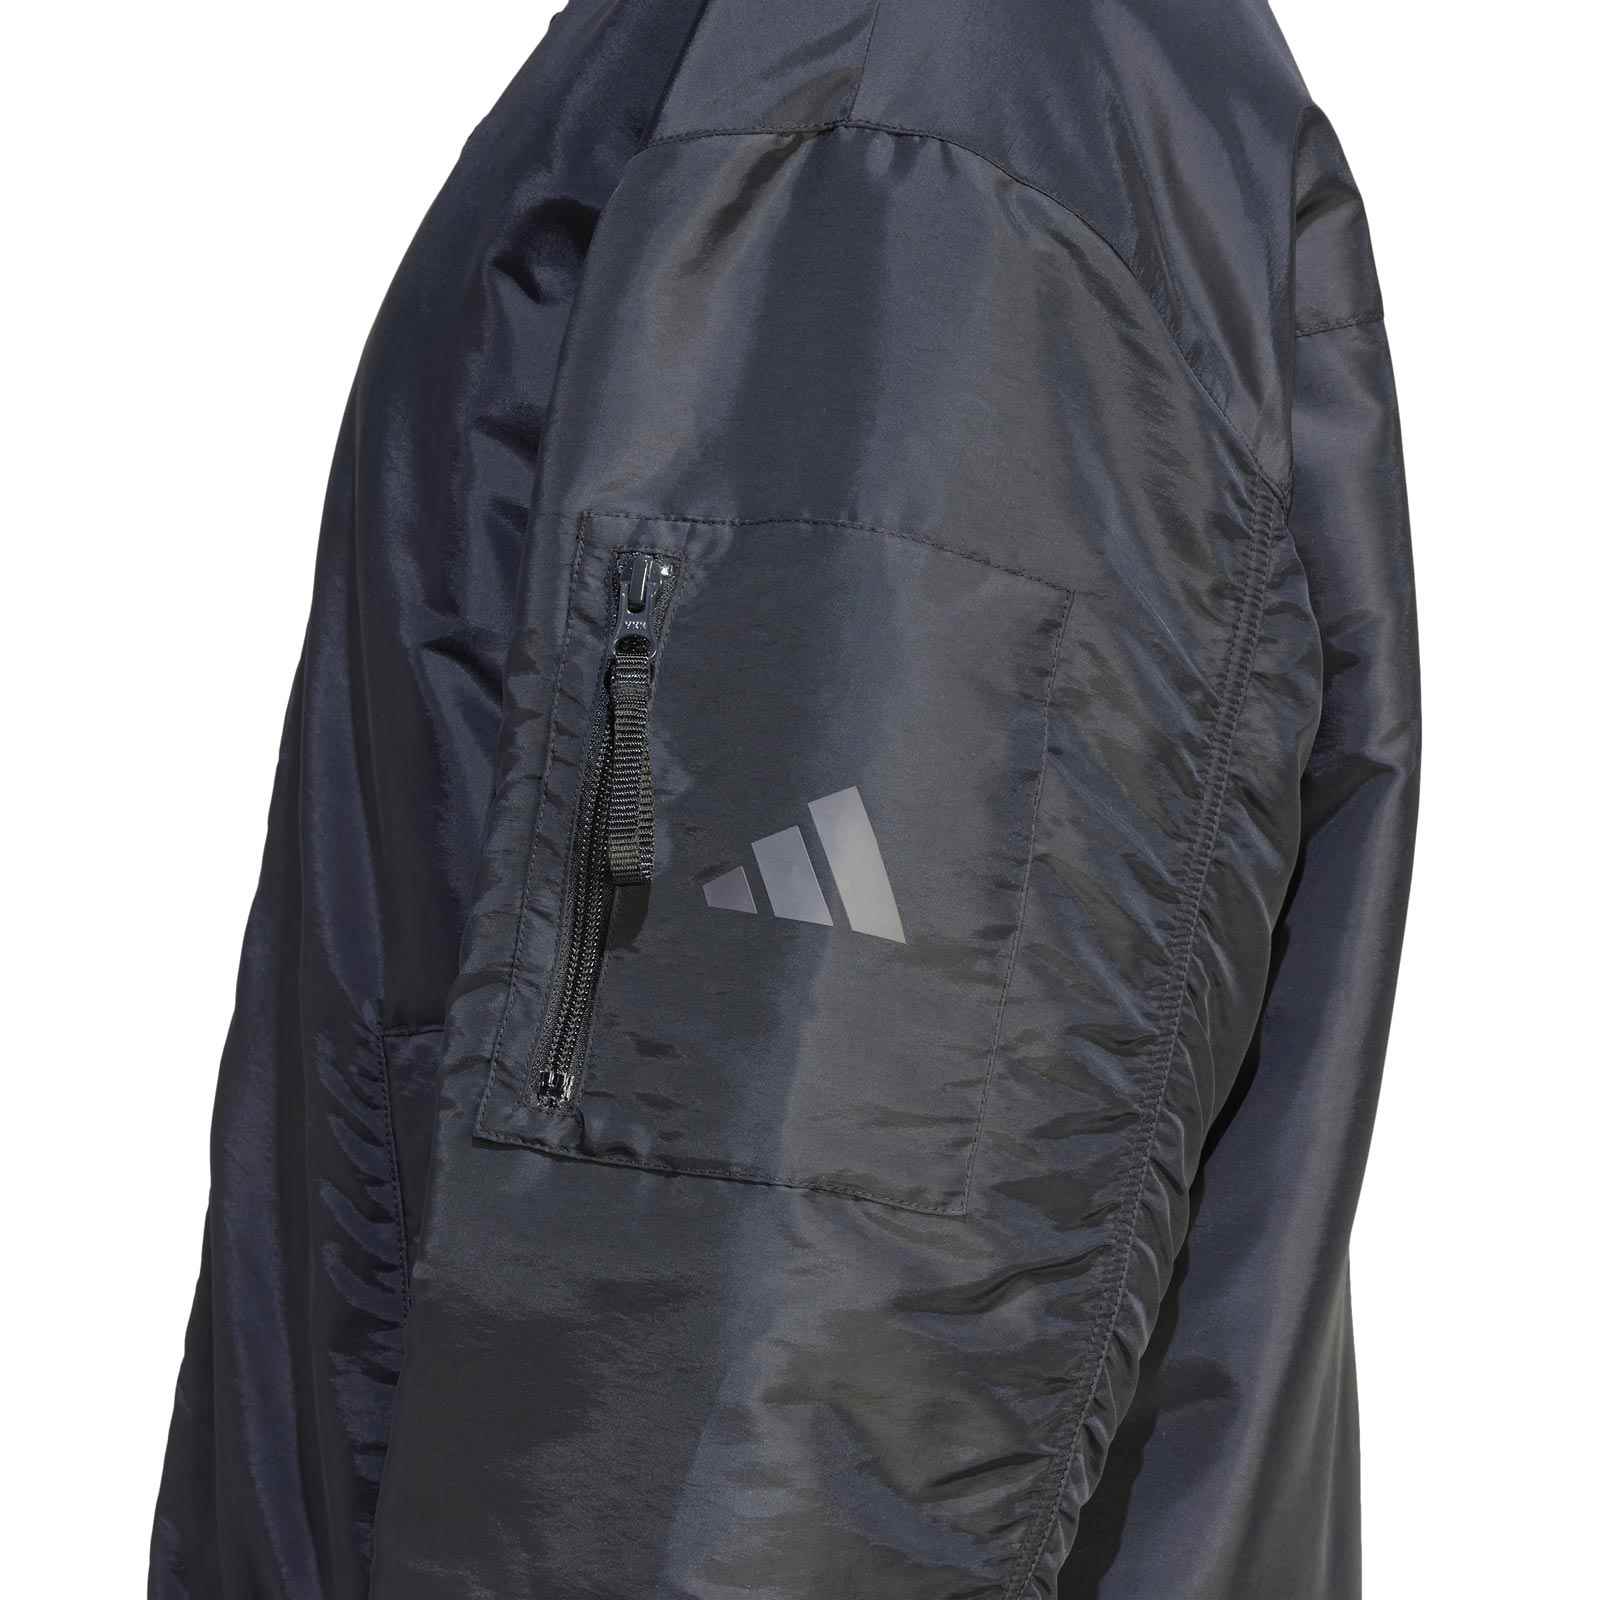 ADIDAS ALL BLACKS RUGBY THIN-FILLED LIFESTYLE JACKET